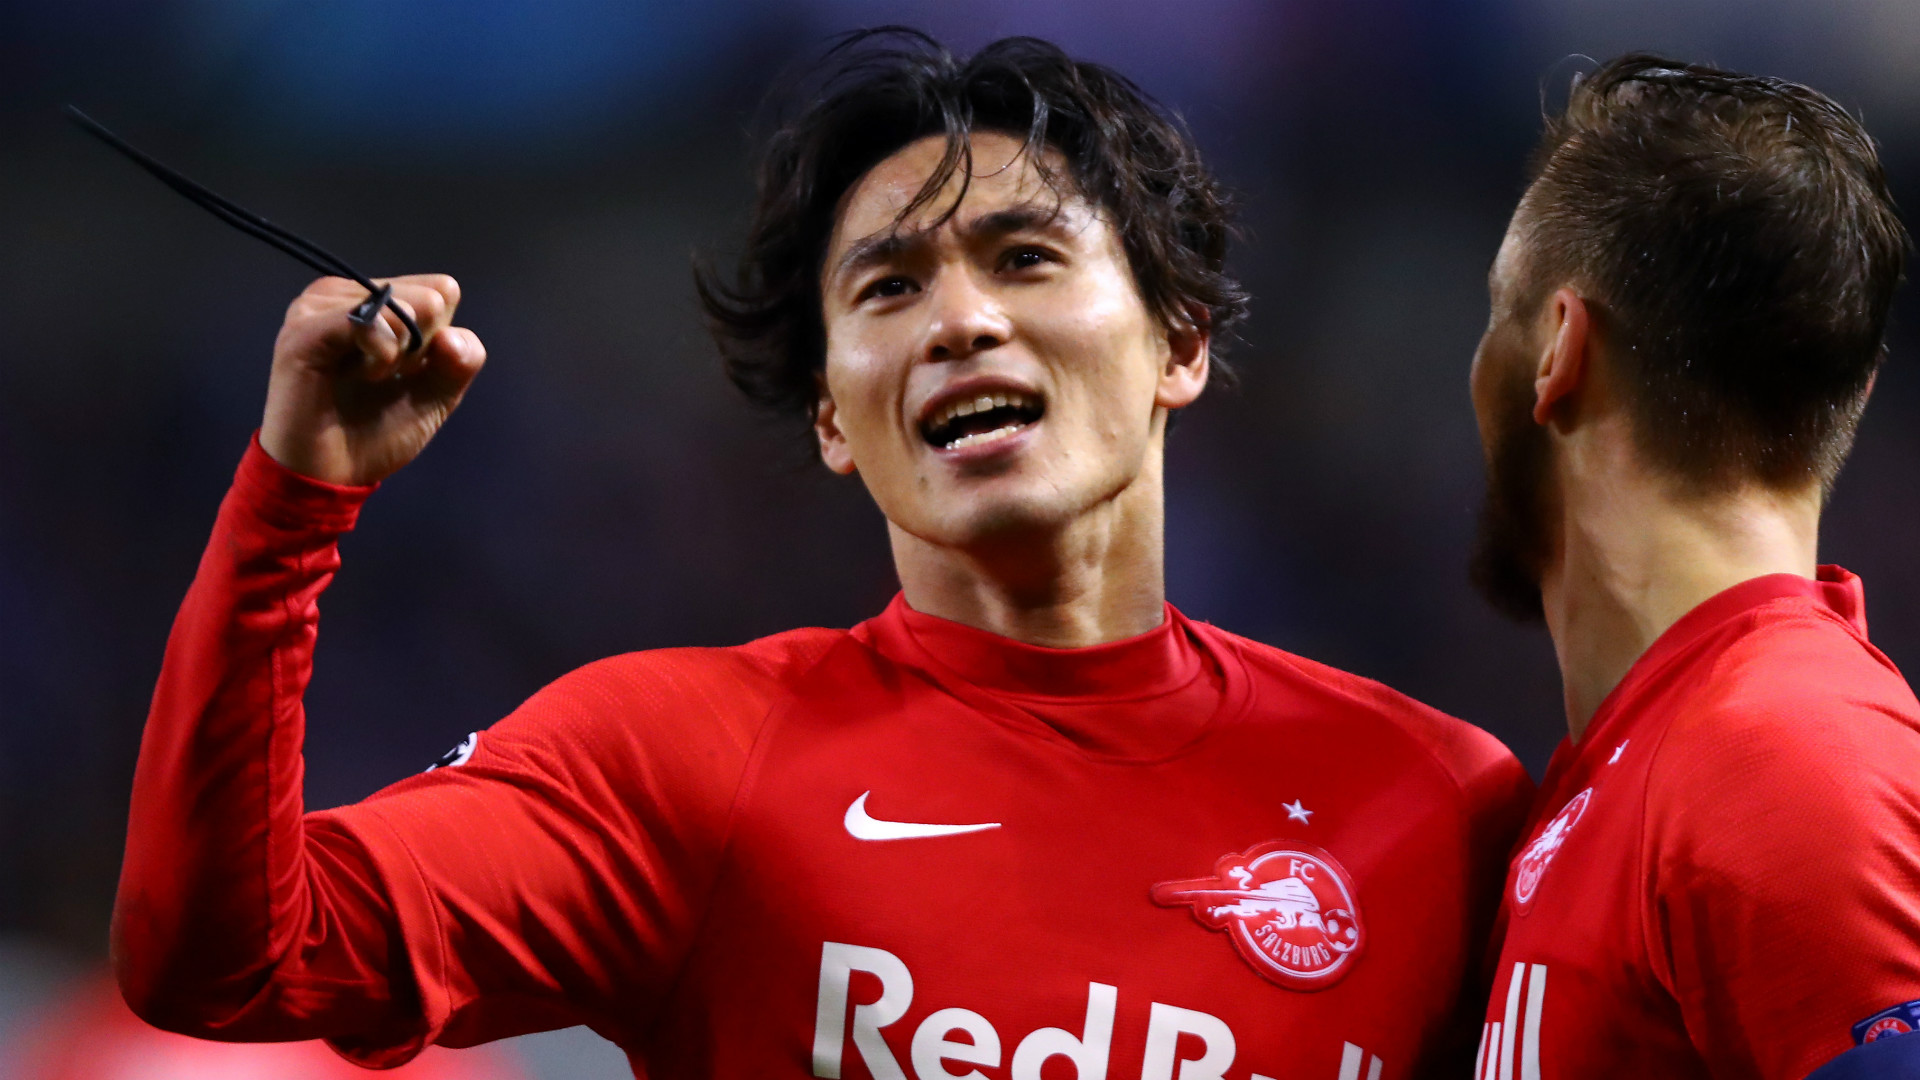 Red Bull Salzburg sporting director confirms Liverpool are in talks to sign Minamino